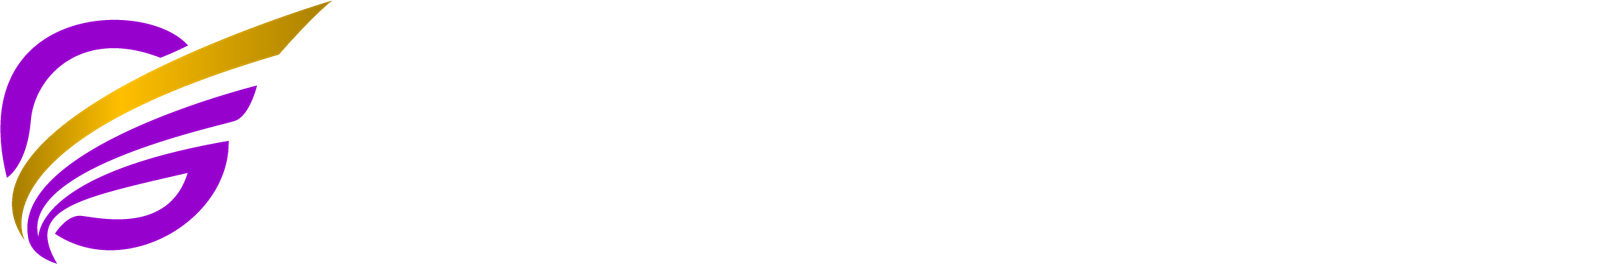 Ophel Consult